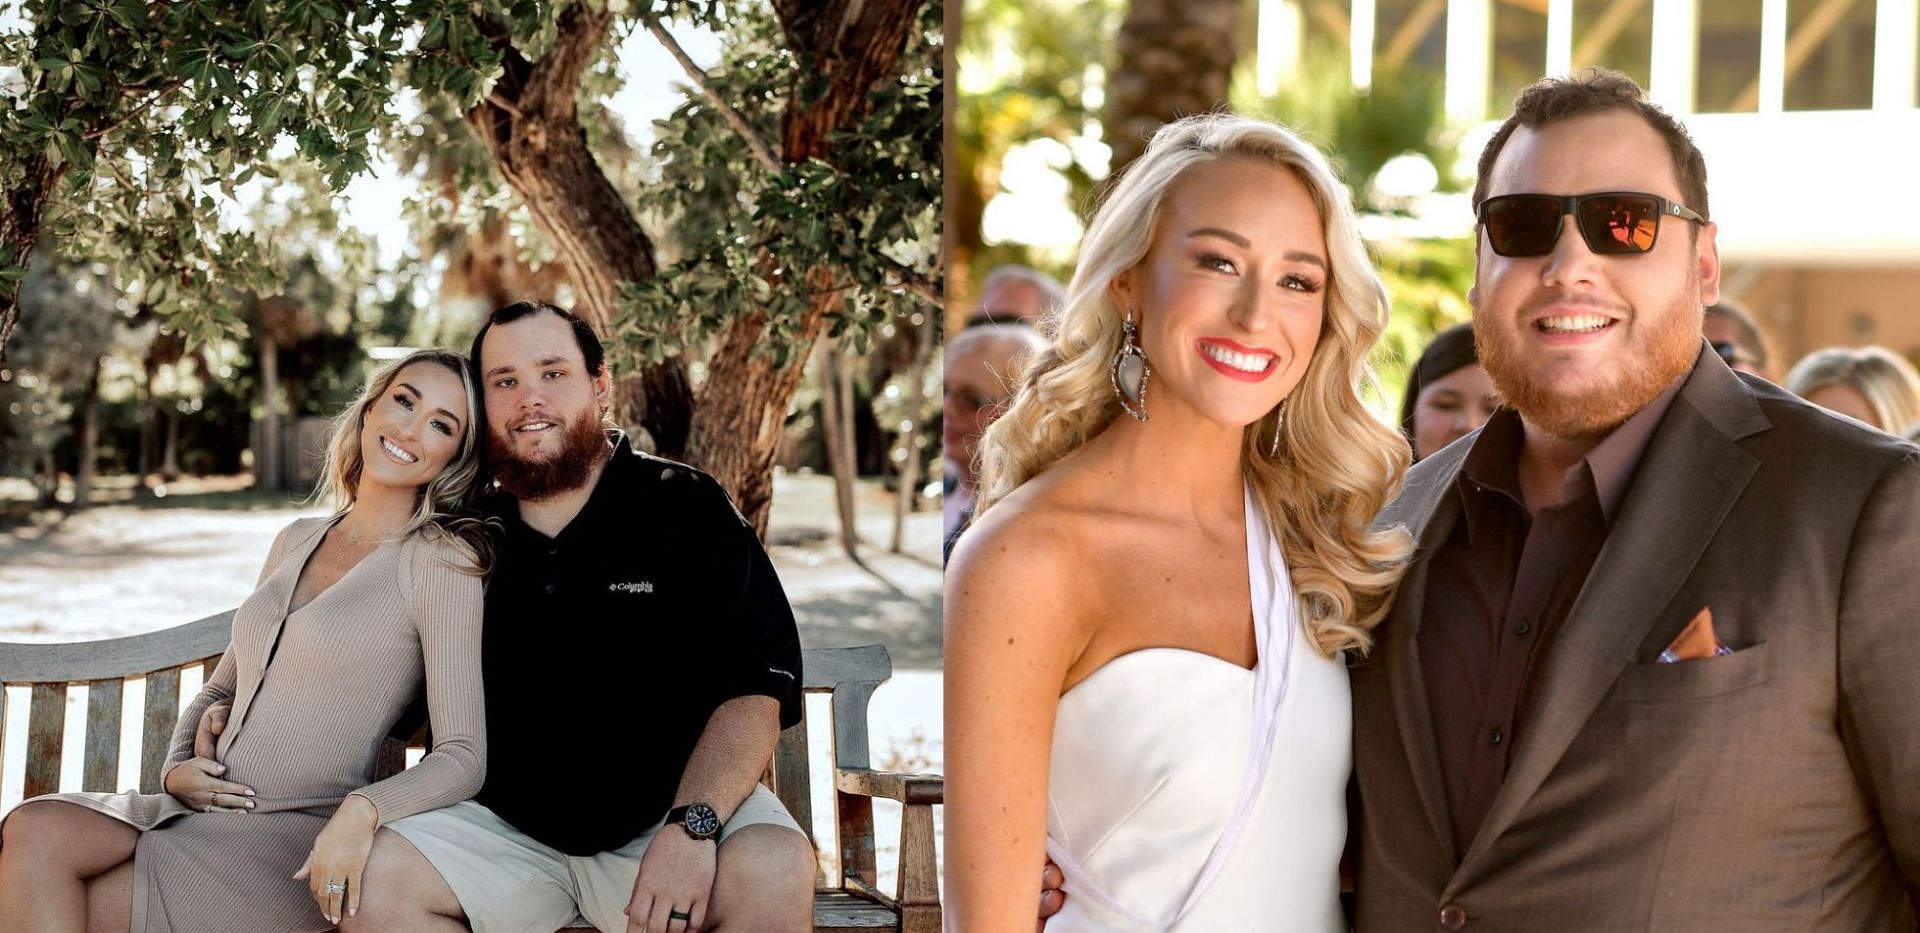 Luke Combs and Nicole Hocking are expecting their first child together (Image via Nicole Hocking/Instagram and Matt Winkelmeyer/Getty Images)